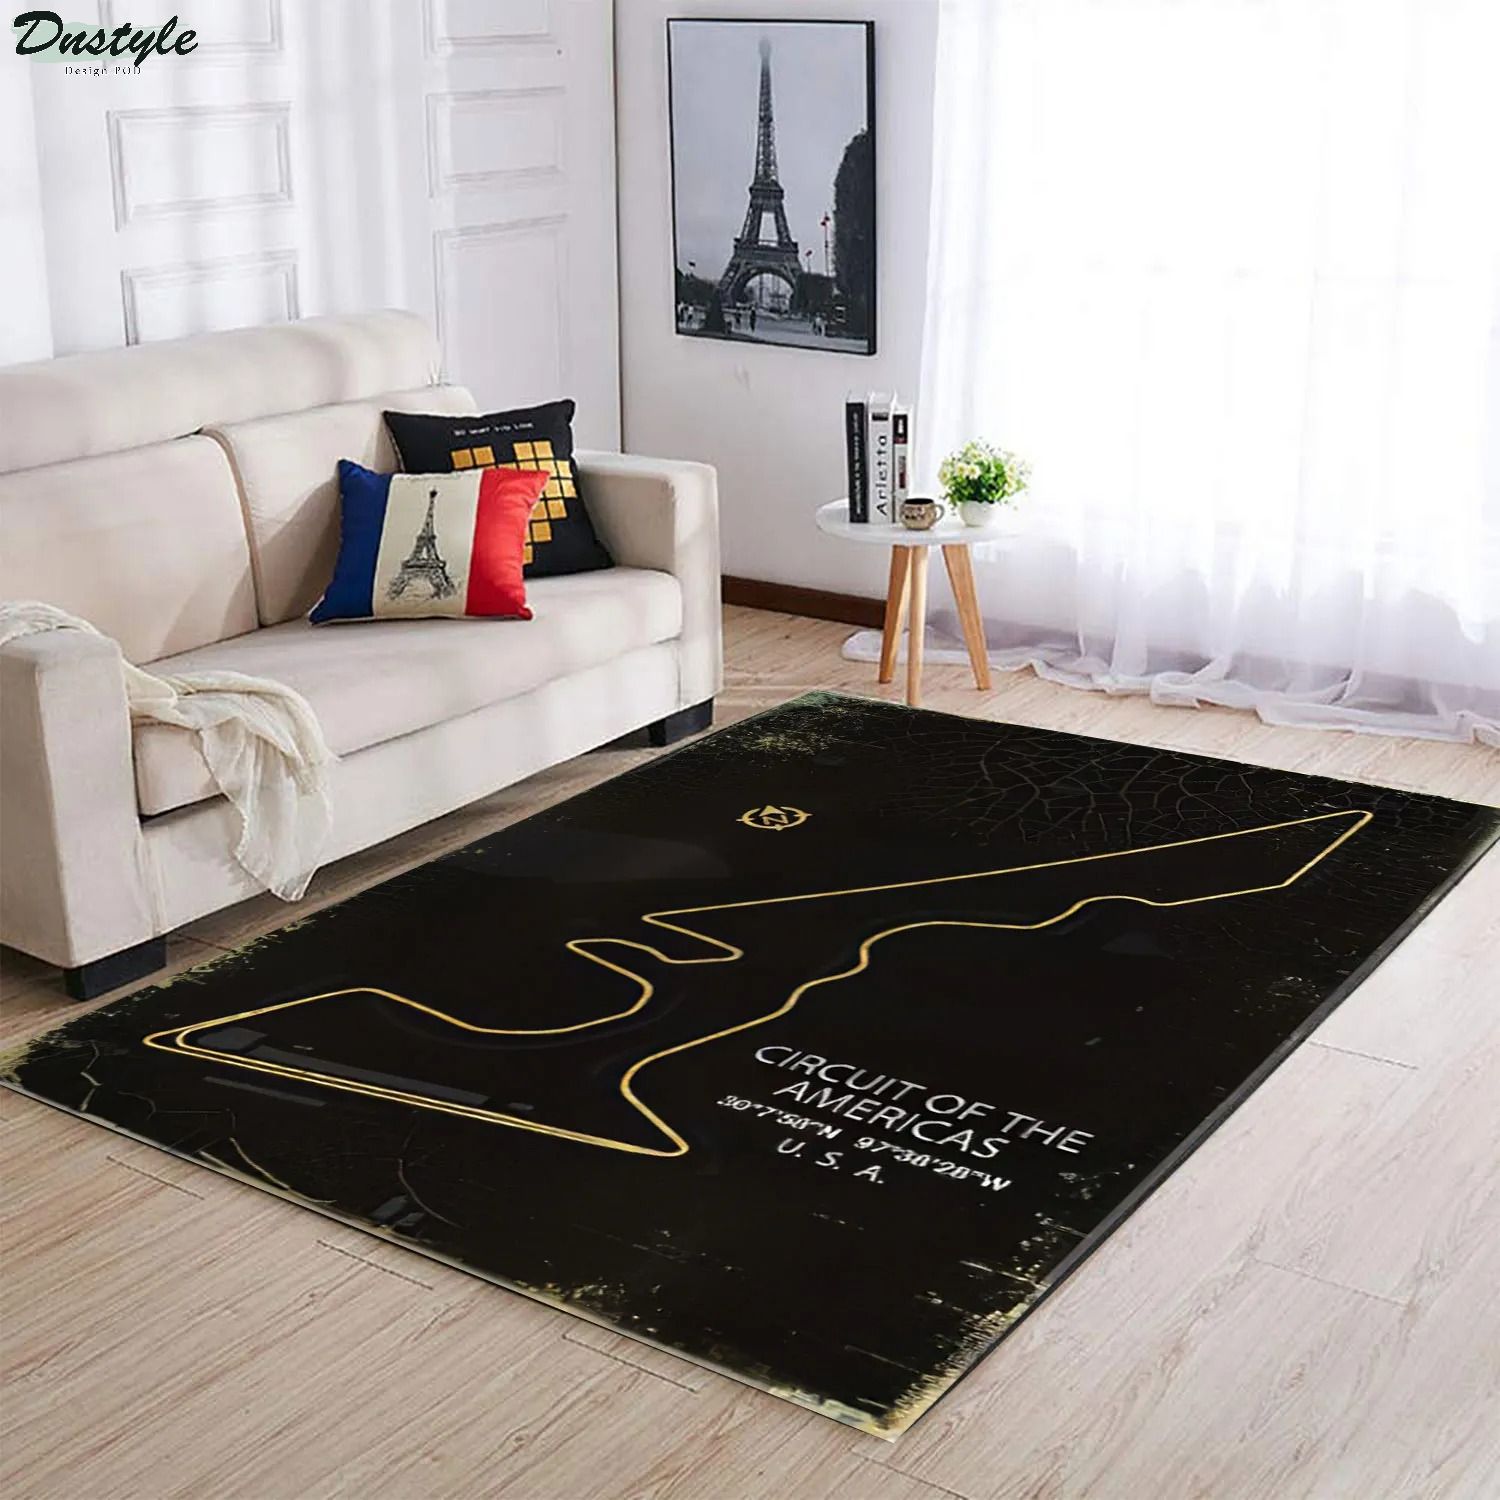 Circuit of the americas F1 track rug 2